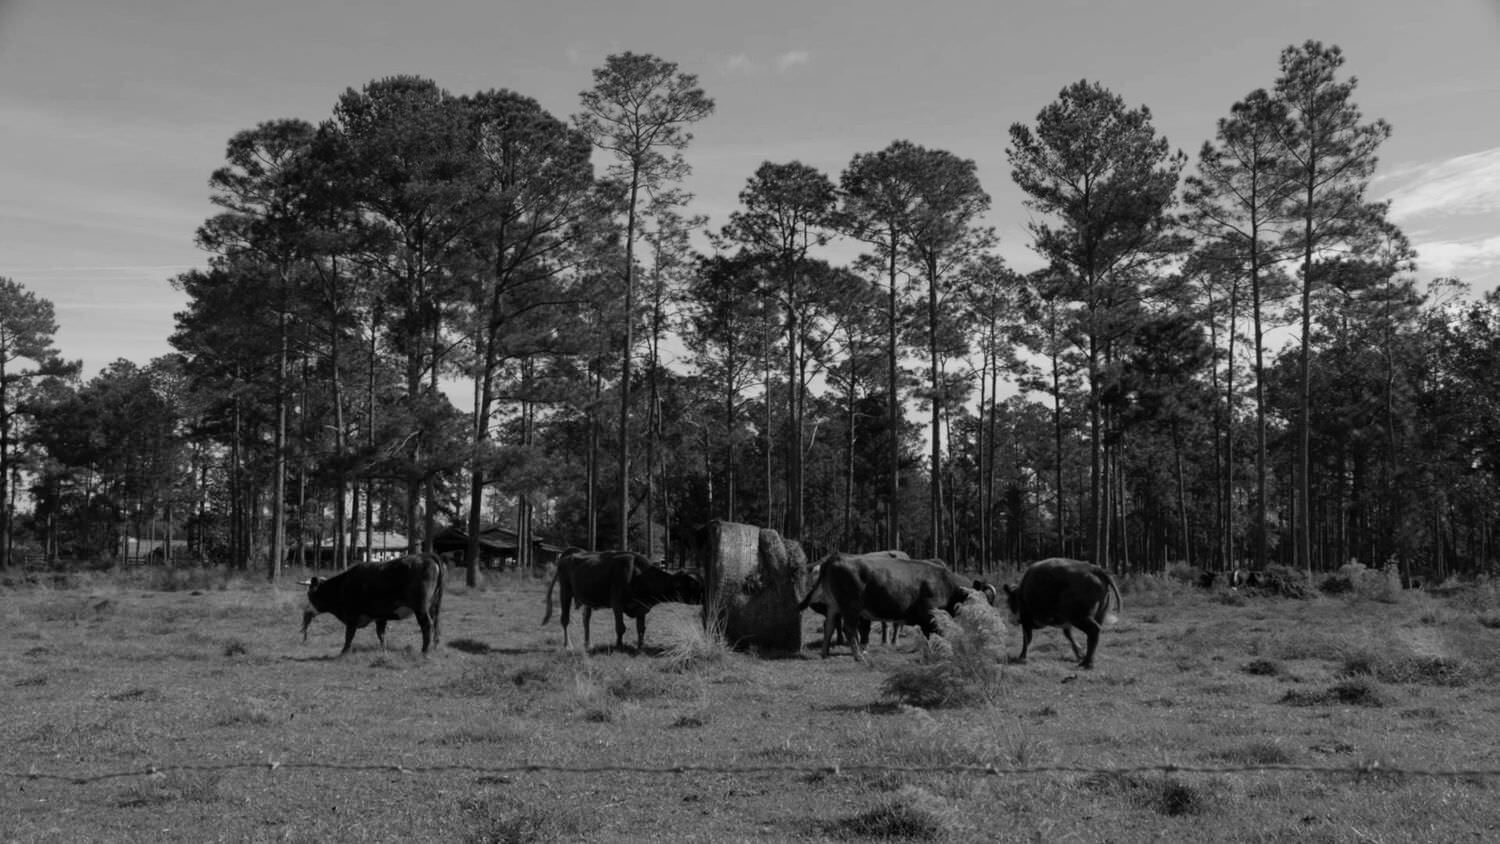 Livestock at a feeding station in a field, some of them eat hey. Black and white shot.